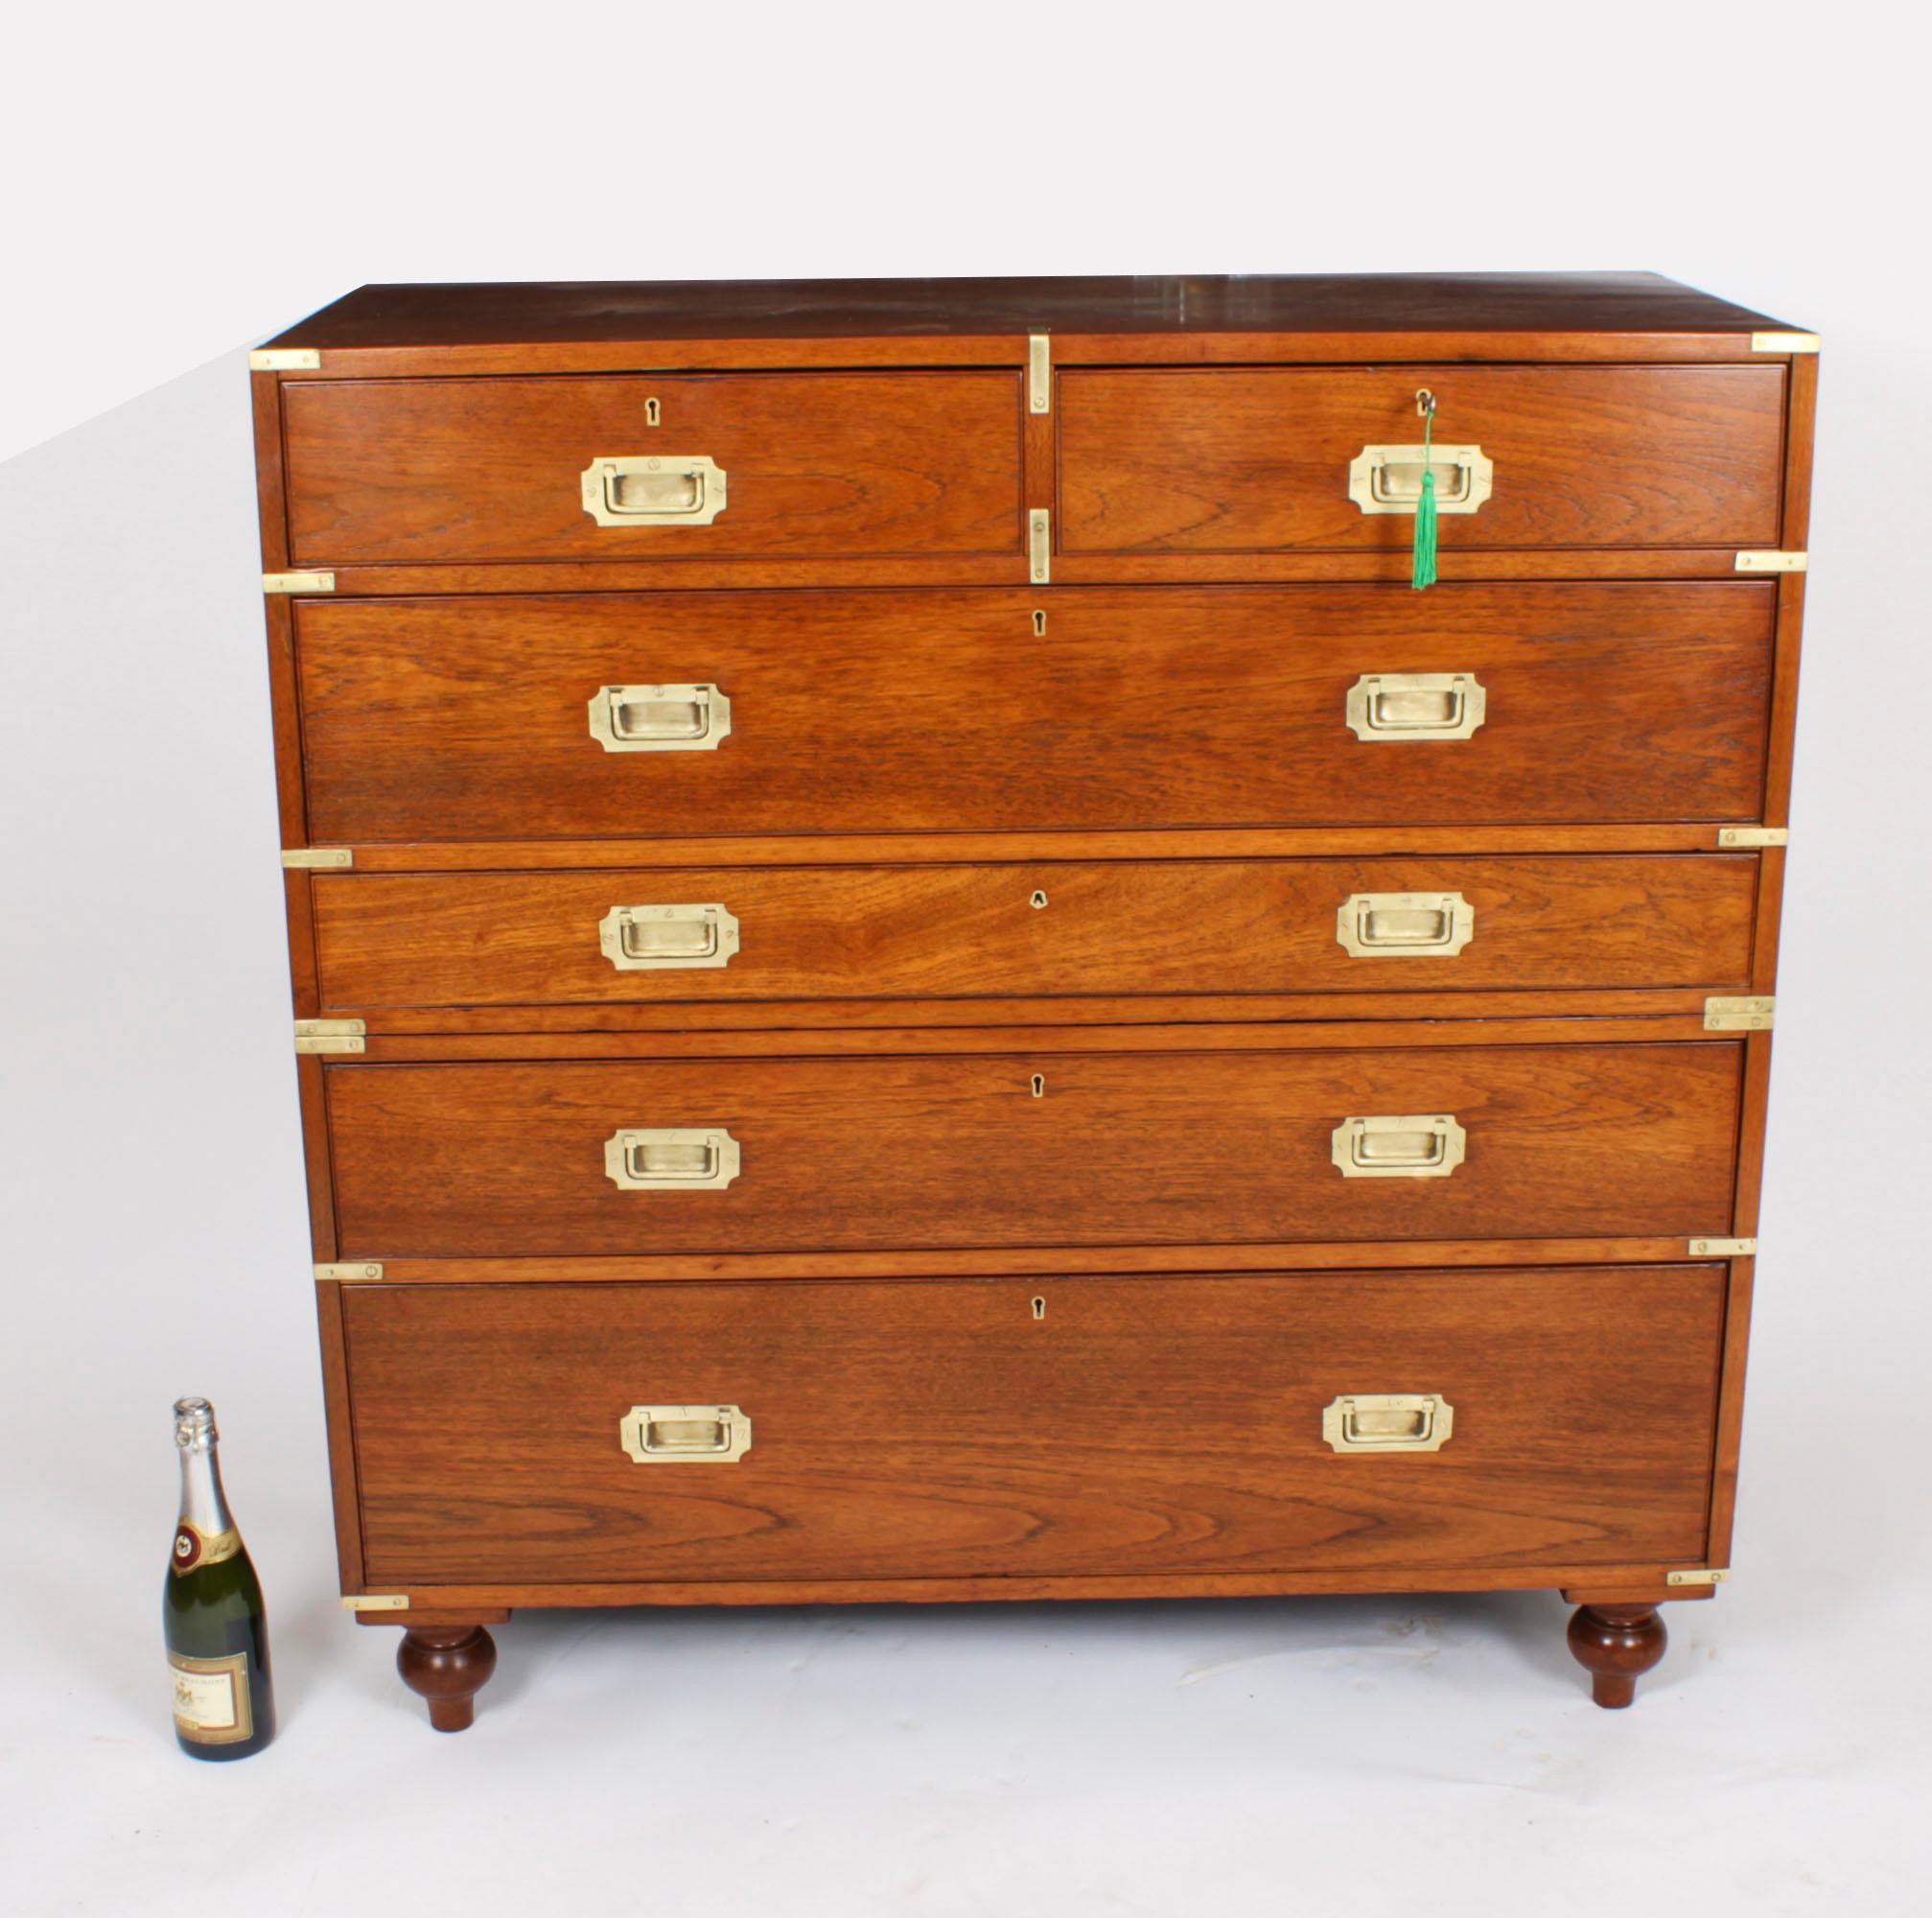 Antique Victorian Military Teak Secretaire Chest of Drawers C1840 19th C For Sale 14